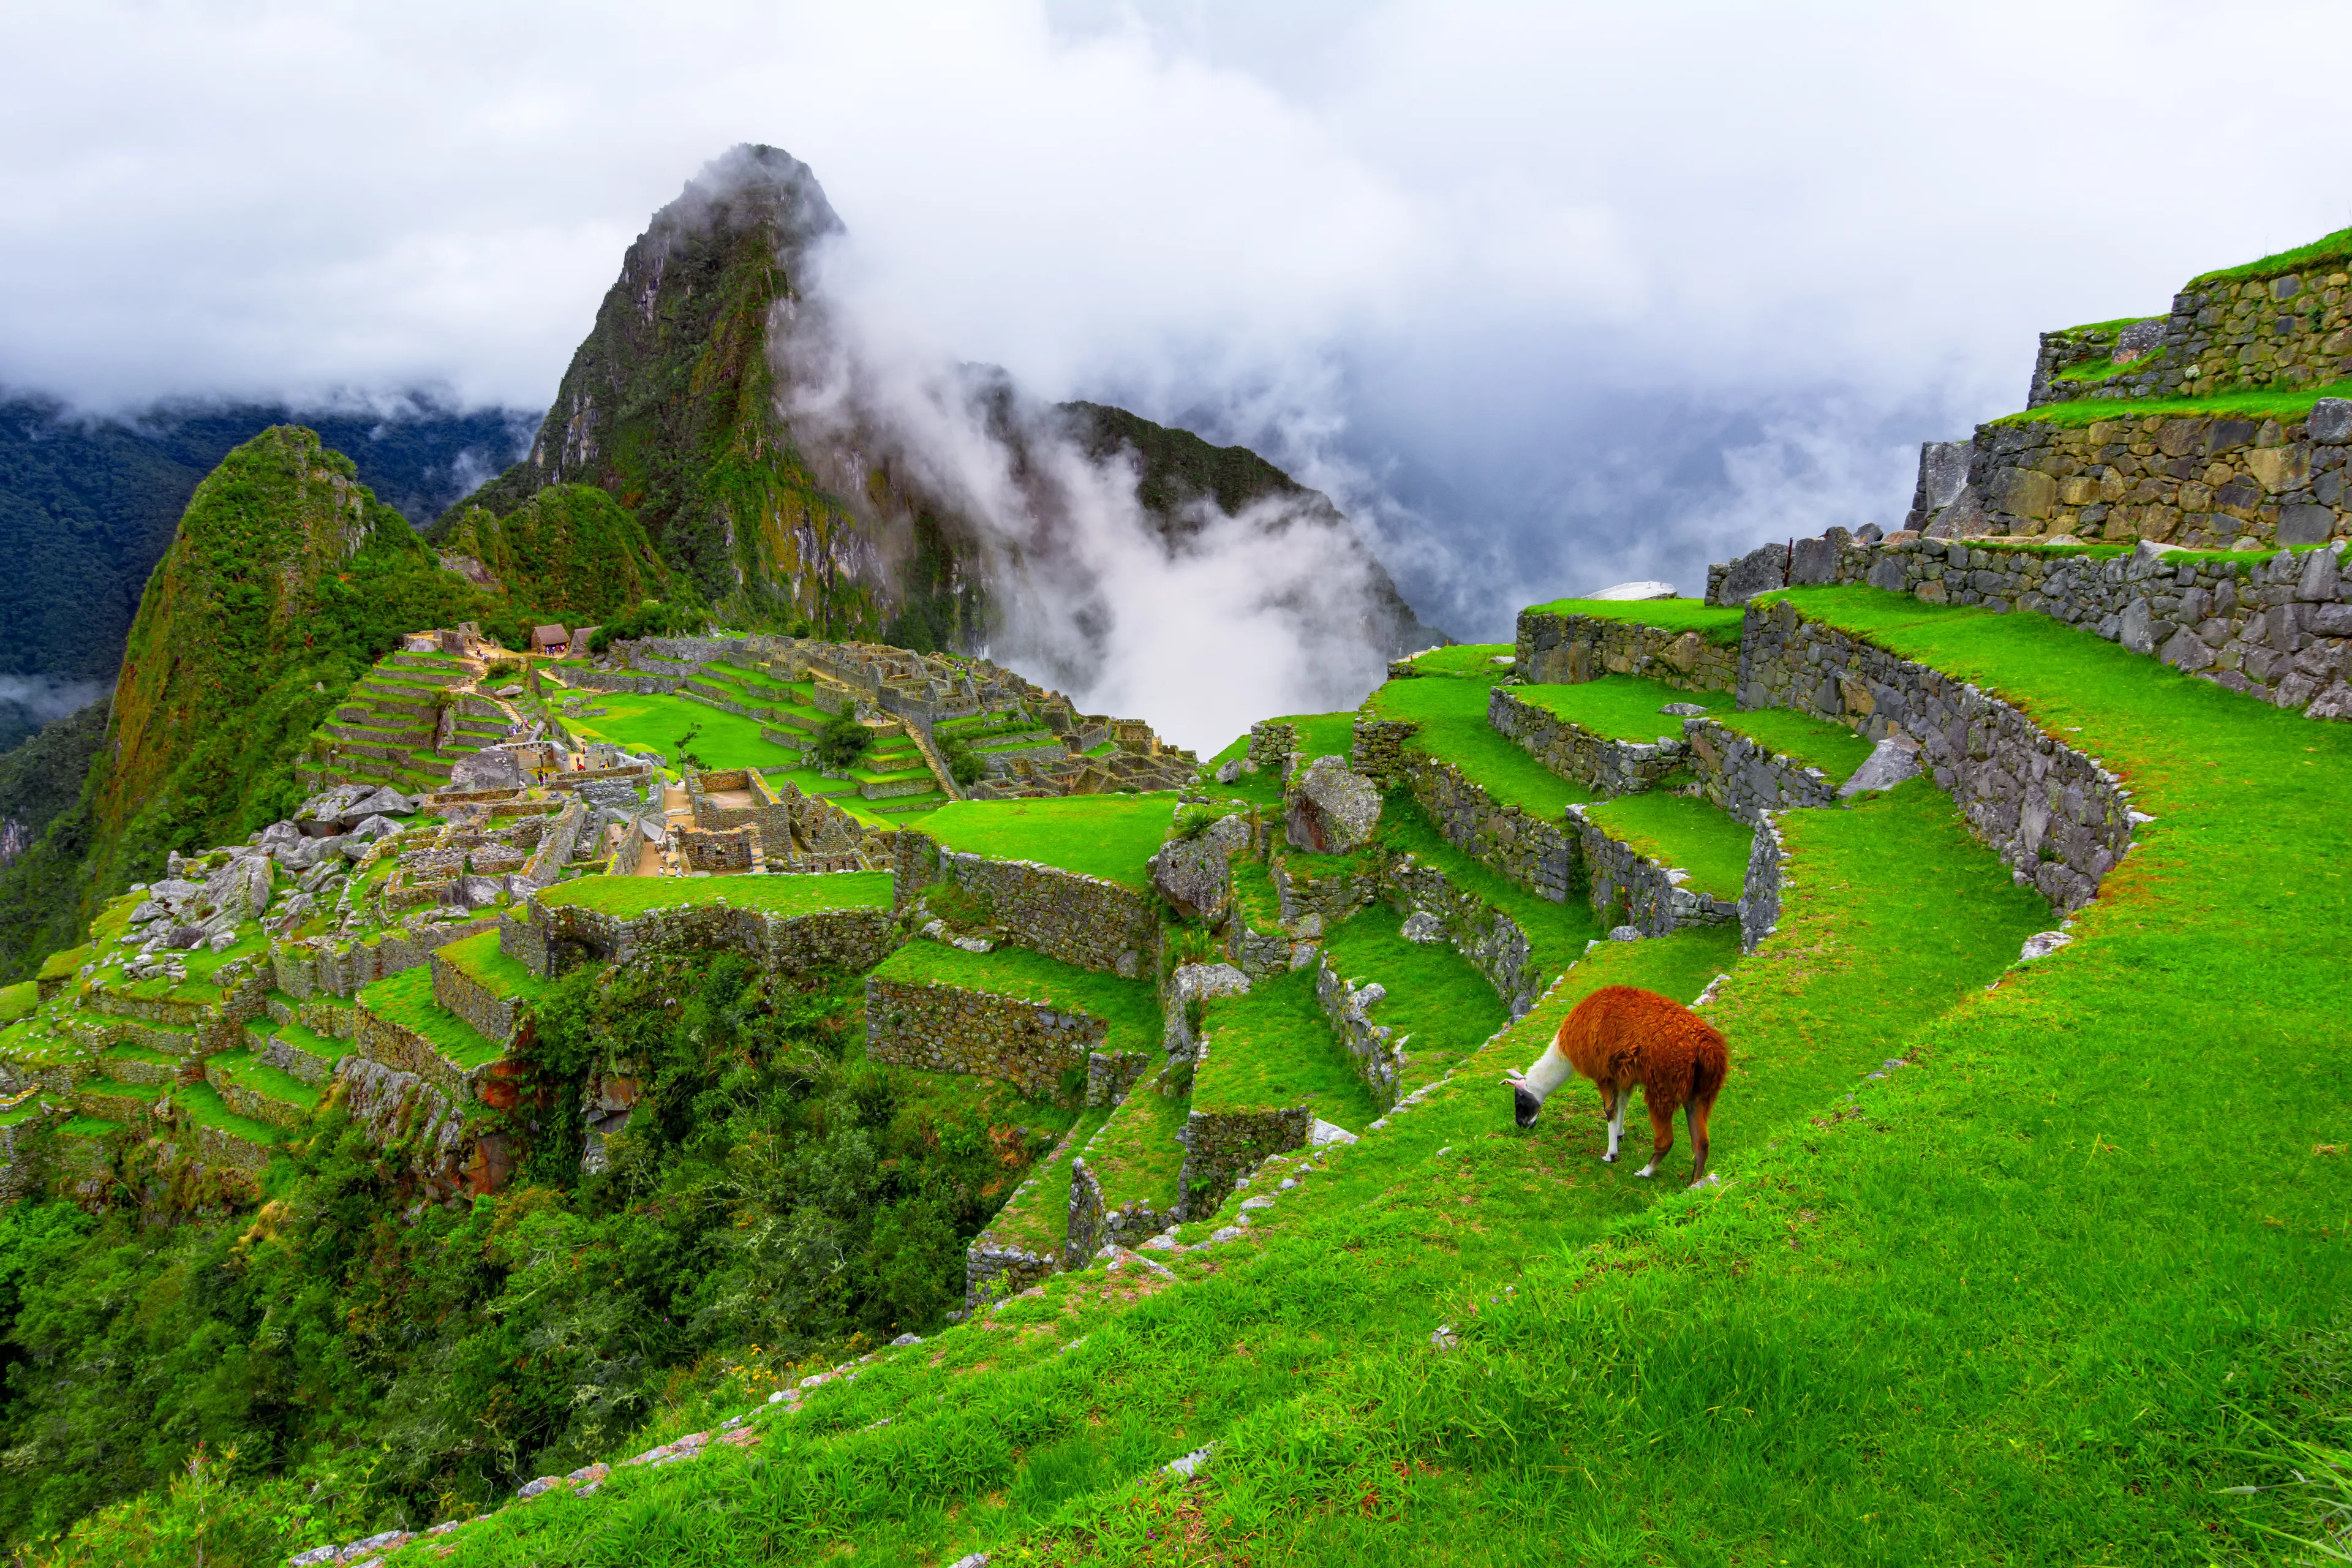 1-Day Family Sightseeing & Relaxation Trip to Machu Picchu